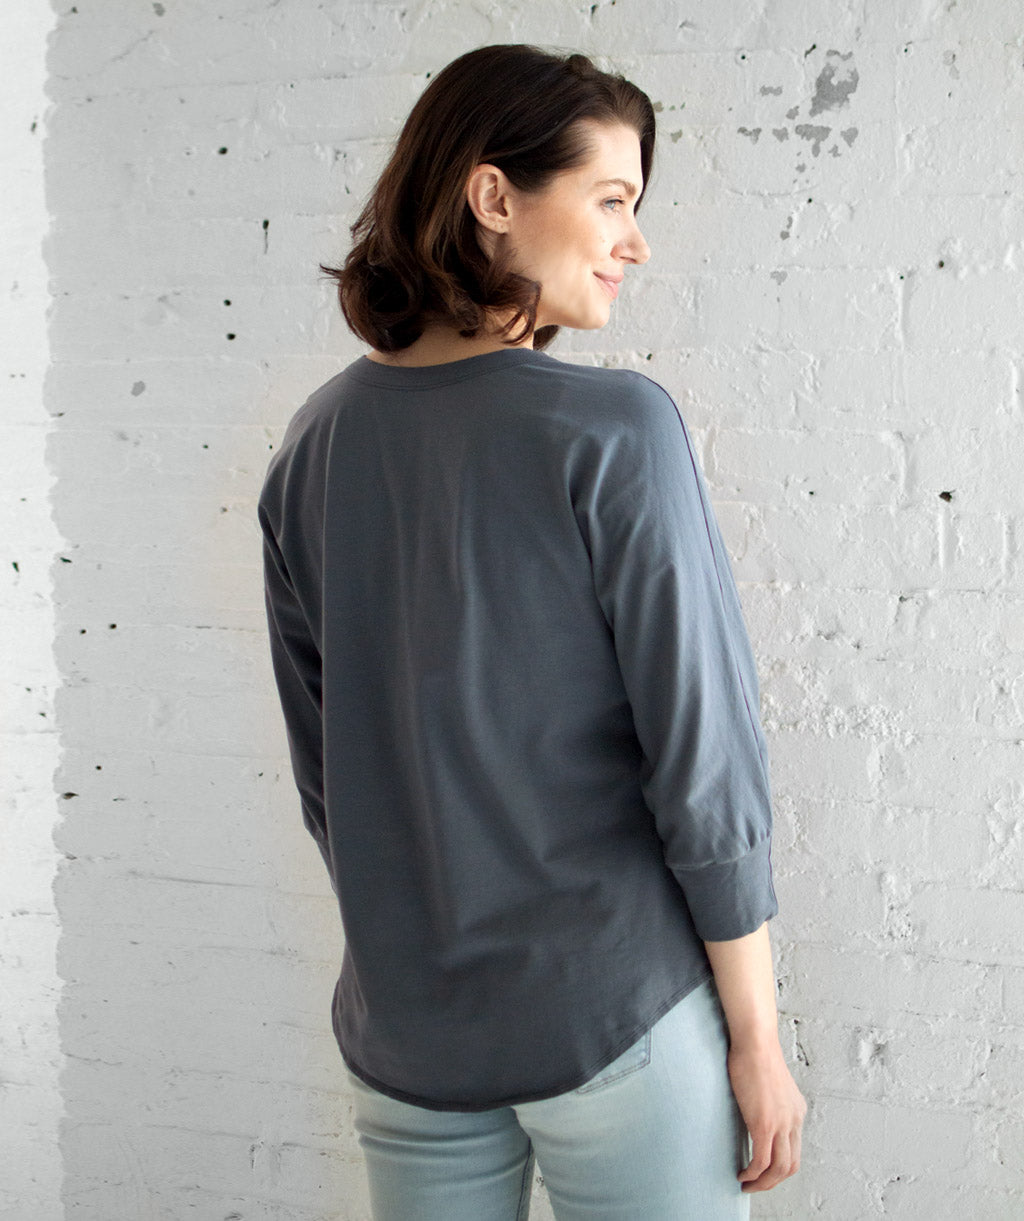 MABEL top in Anchor Grey